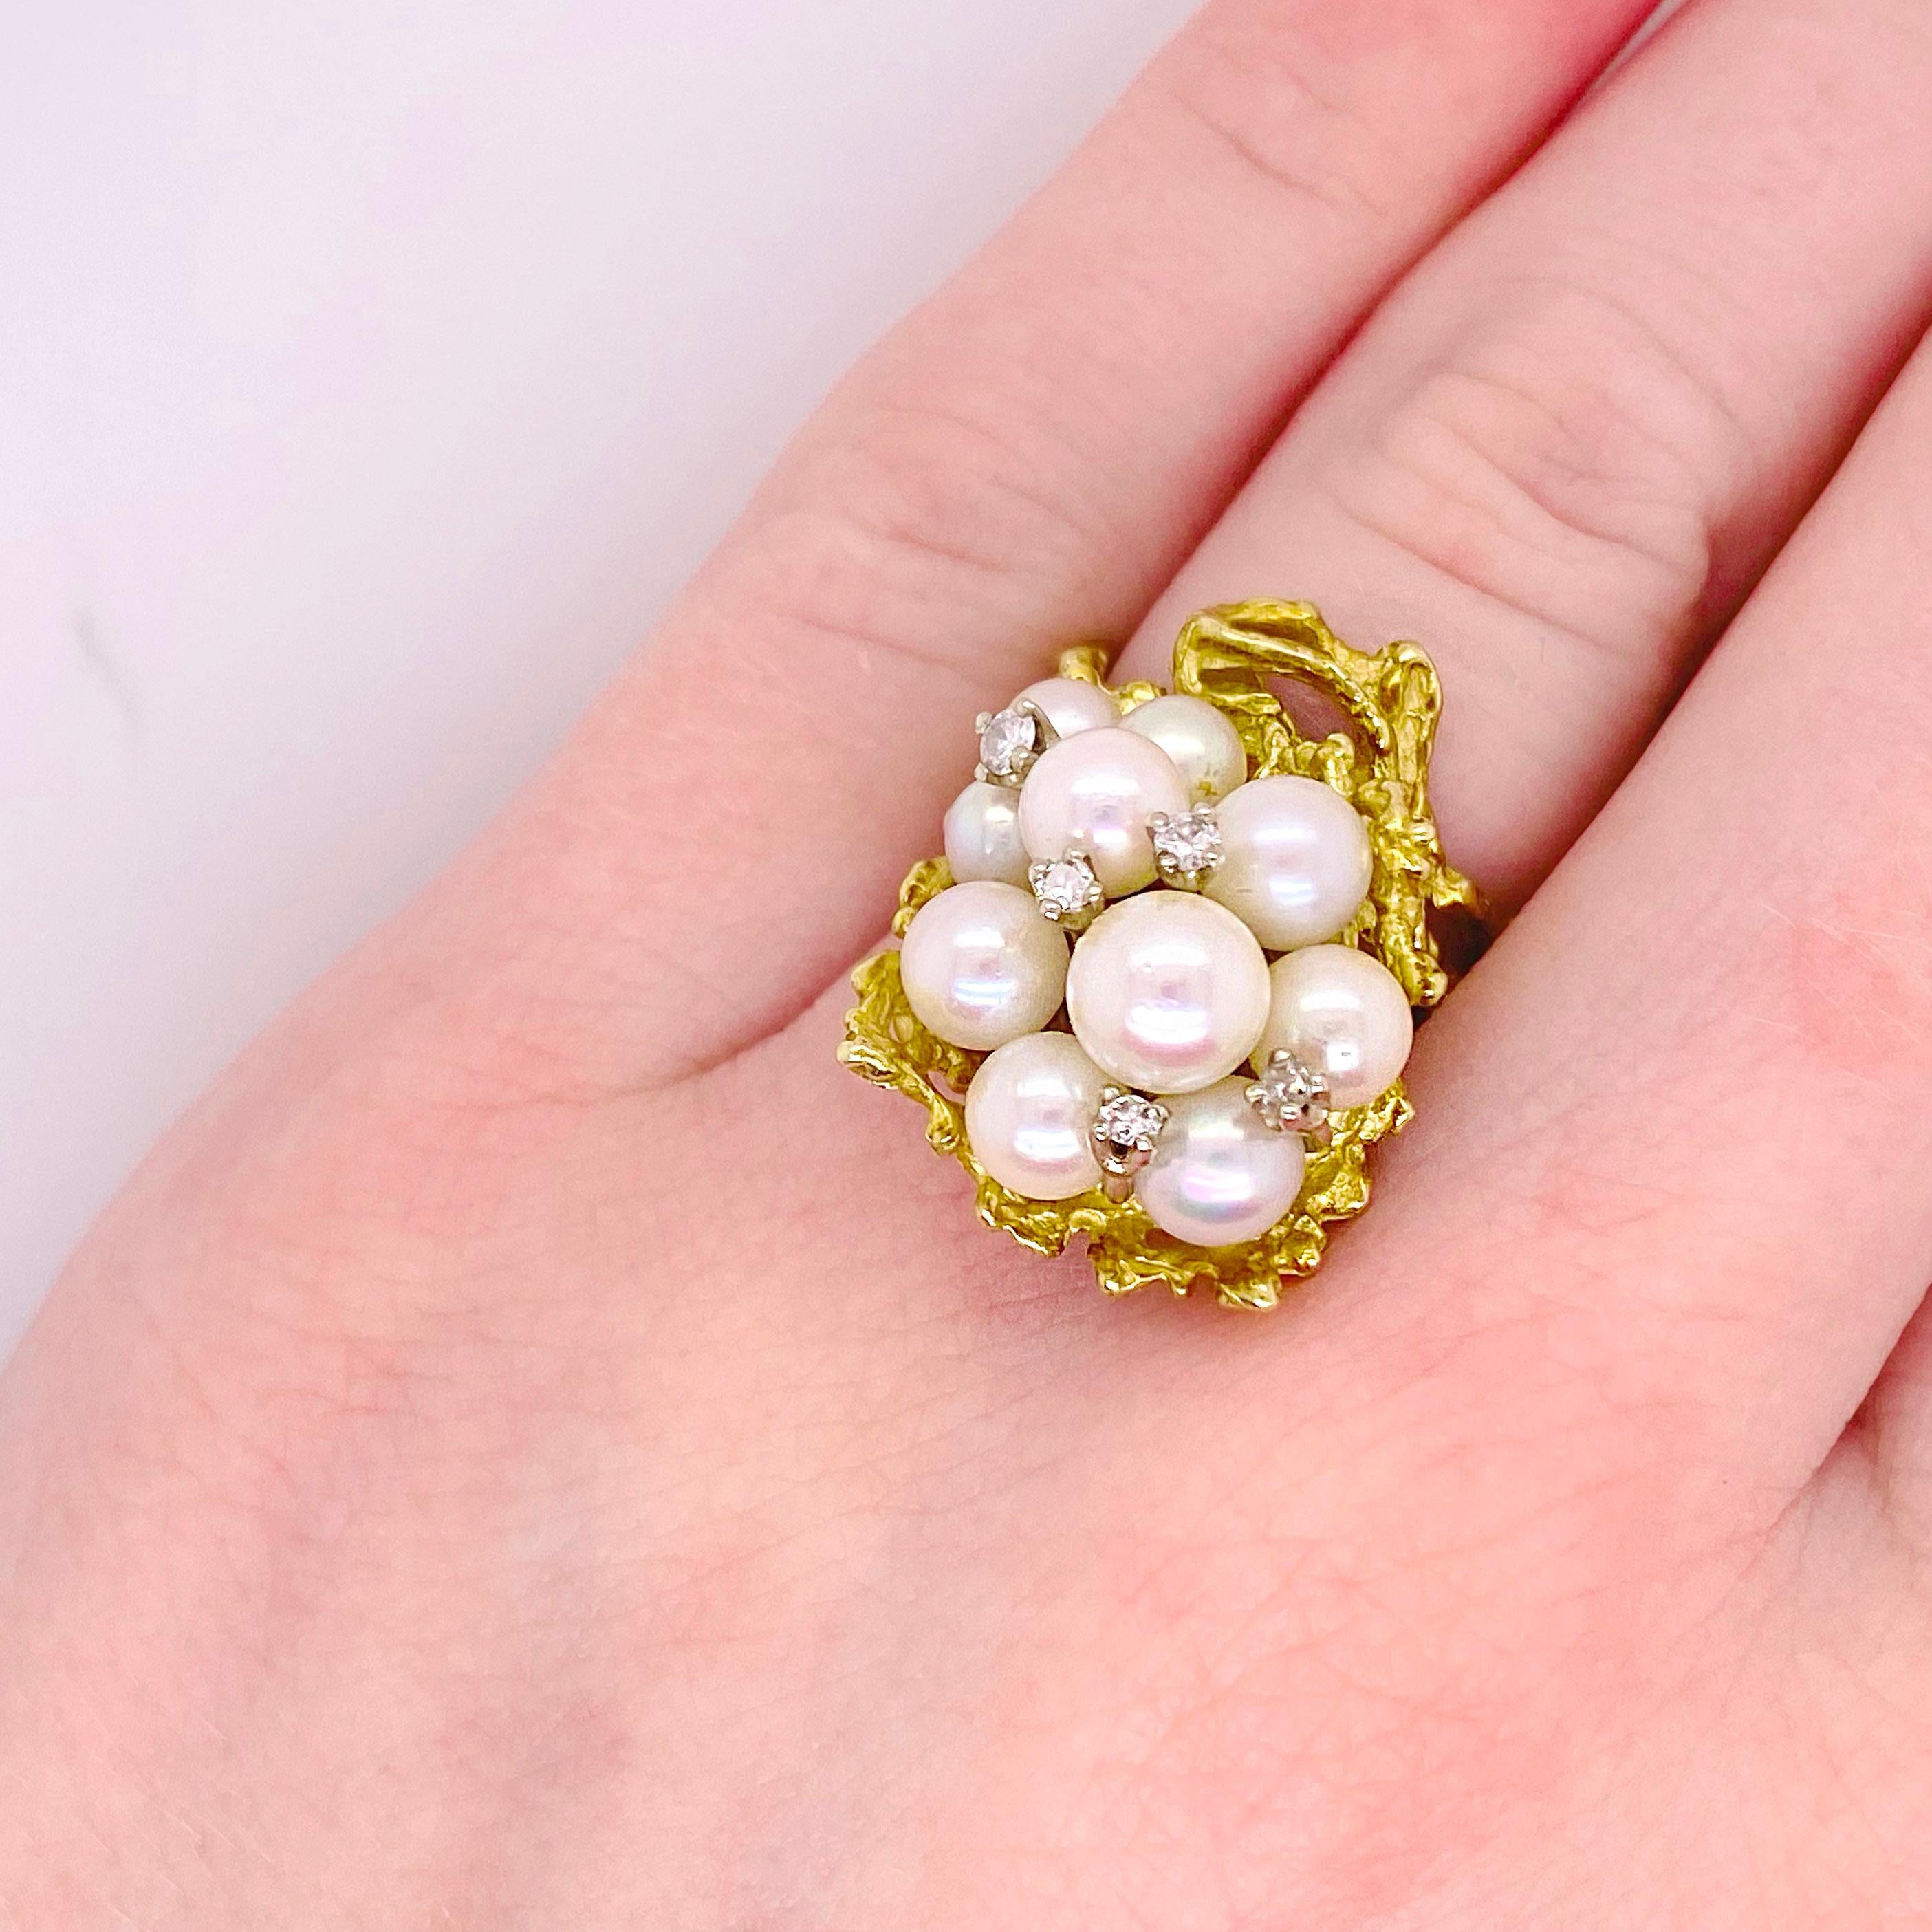 This stunning Akoya pearl and diamond cluster ring is a gorgeous unique ring that will complement any look. Its uniquely crafted setting gives an organic oceanic feeling to the ring. 
Metal Quality: 14 kt Yellow Gold 
Diamond Number: 5
Diamond Total